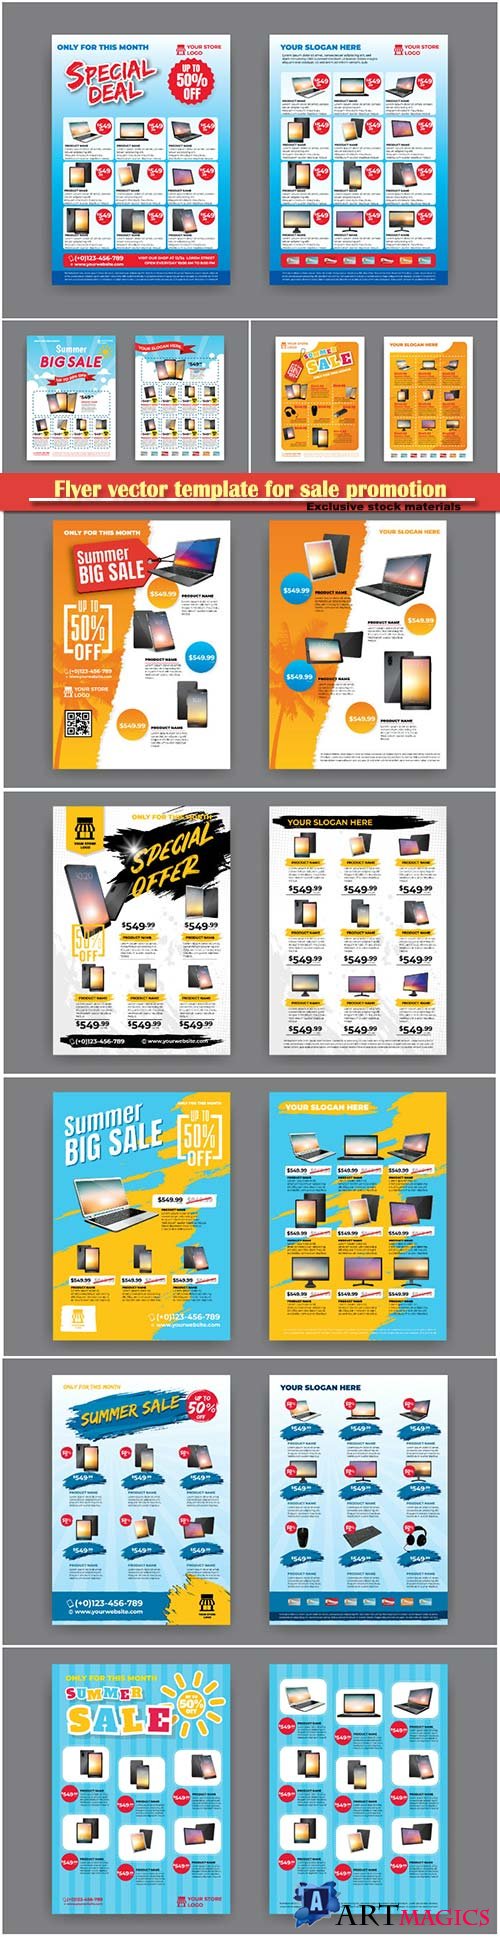 Flyer vector template for sale promotion